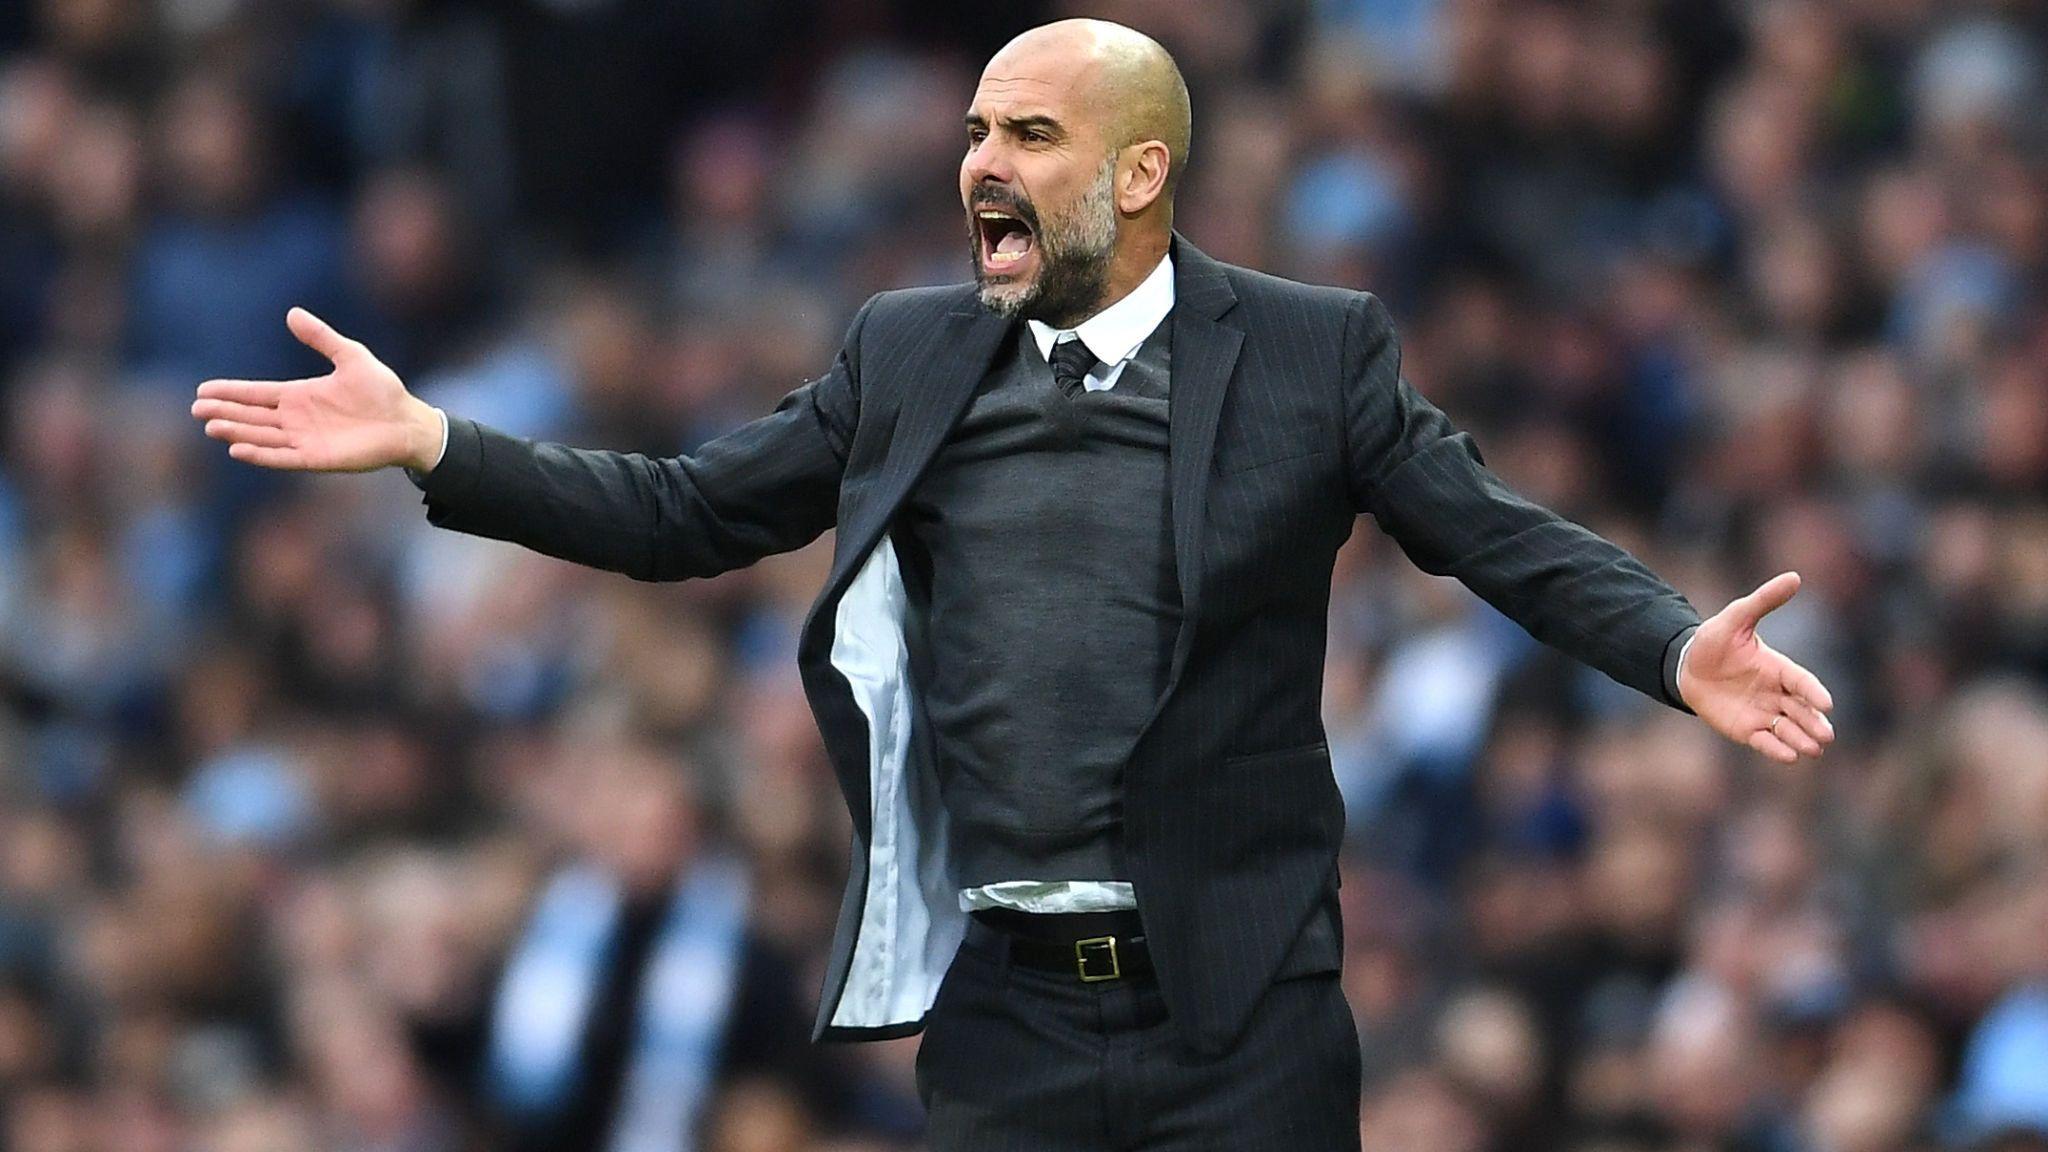 Pep Guardiola insists he will not change Manchester City's style